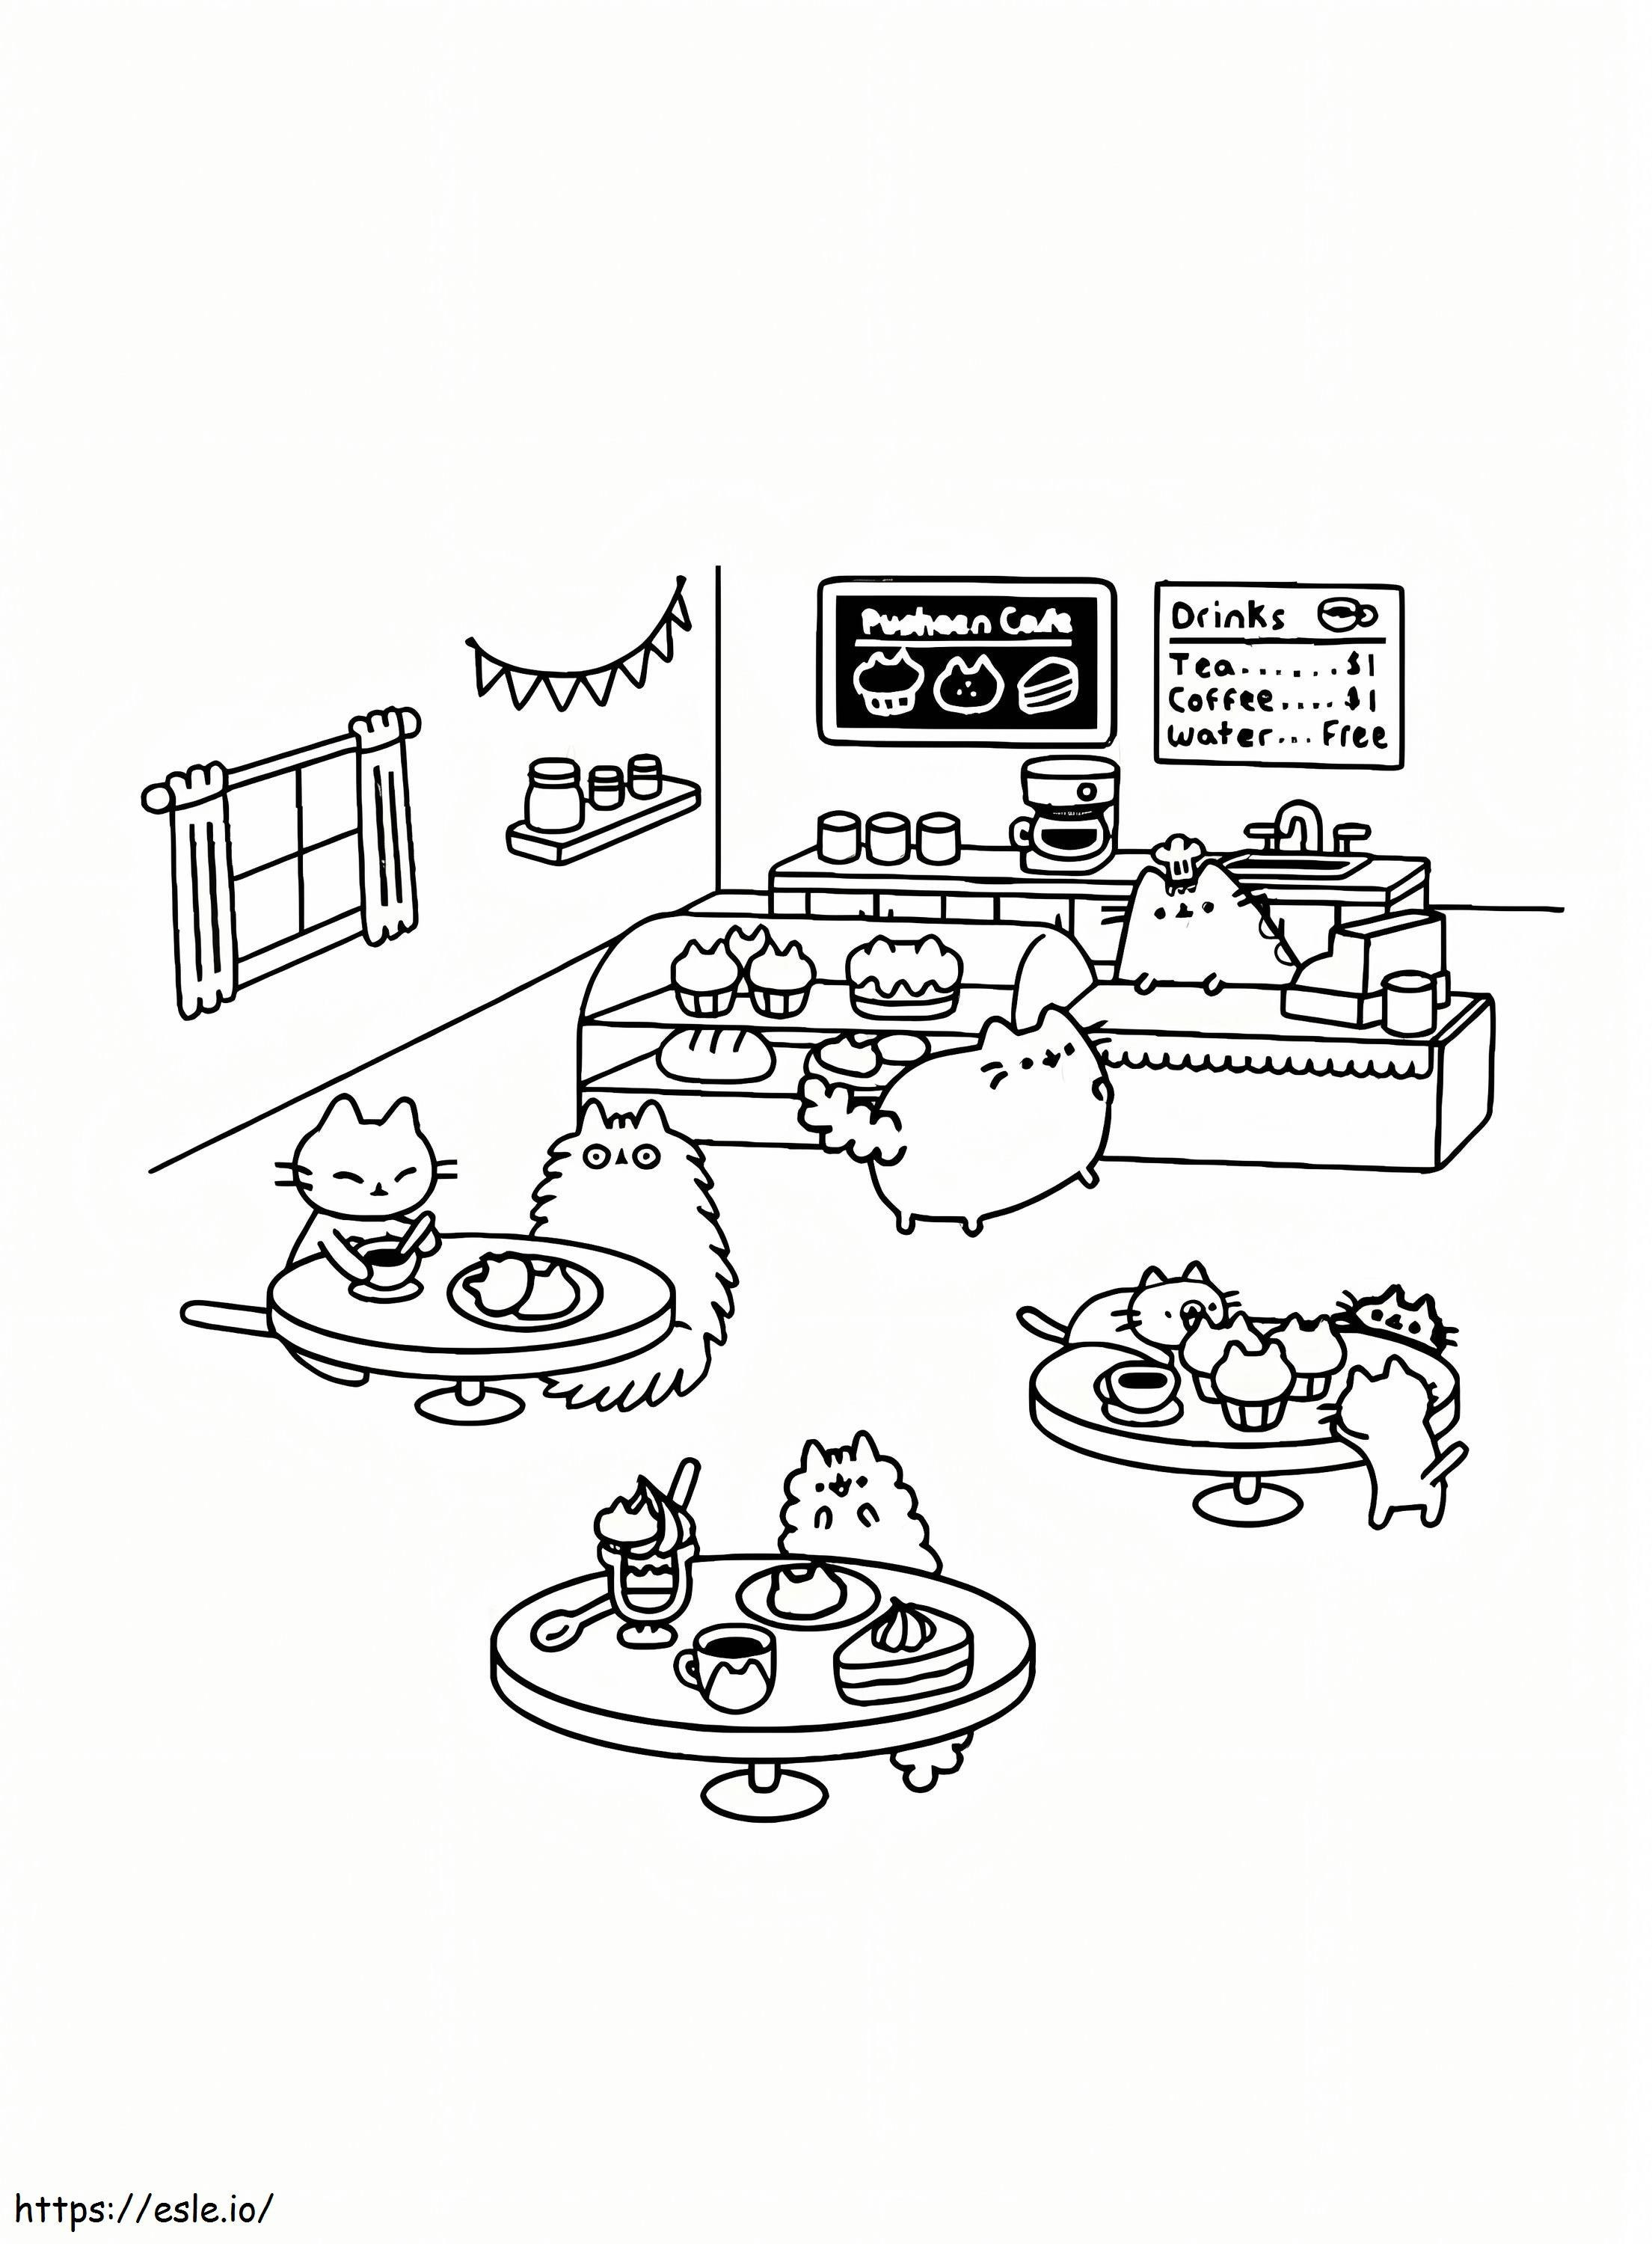 Pusheen And Friends At Home coloring page